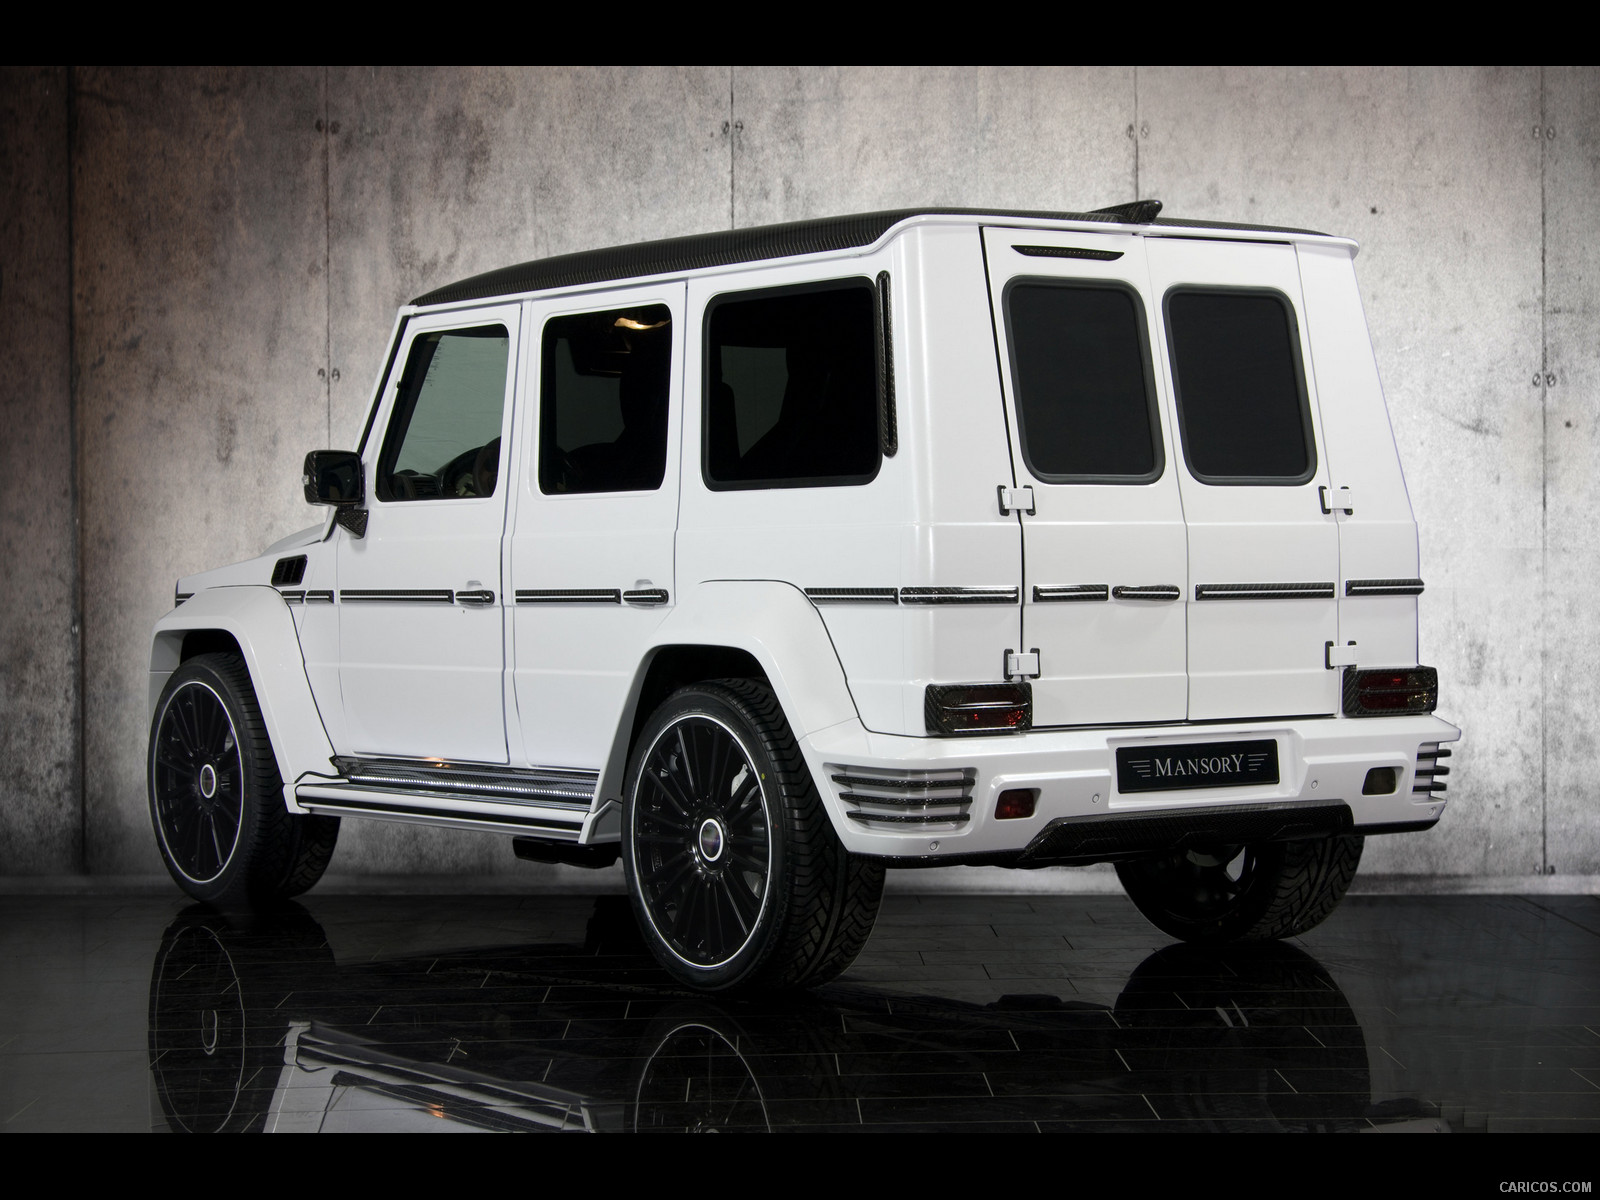 Mansory G-Couture based on Mercedes G-Class White - Rear, #15 of 39